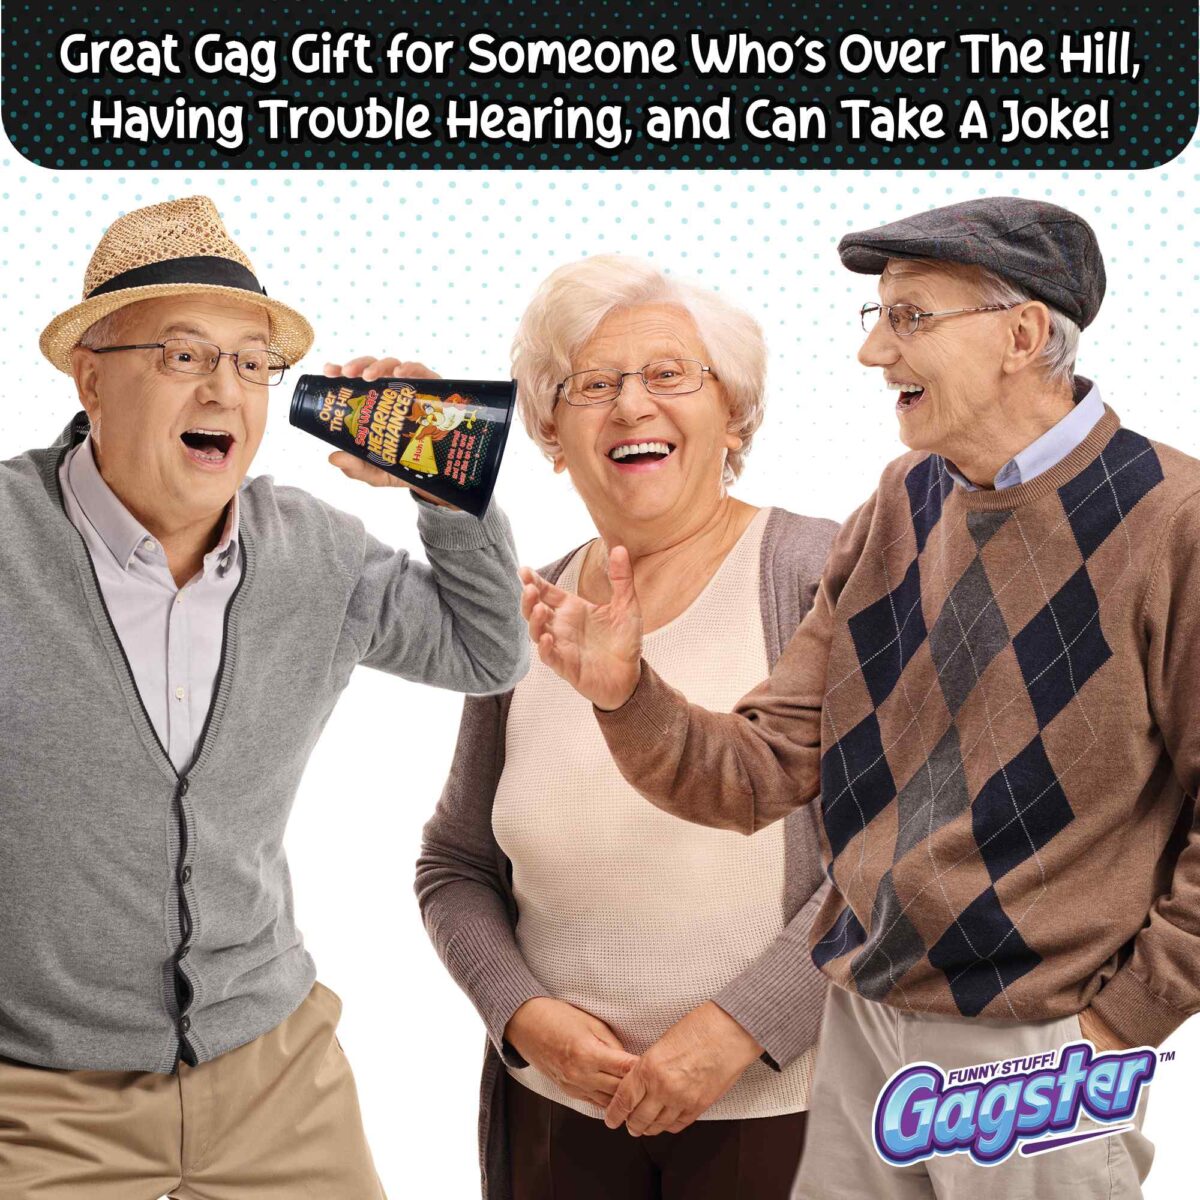 over the hill gifts ear horn for hearing ear trumpet gag gift 40 gag gifts for men turning 50 old people gag gifts